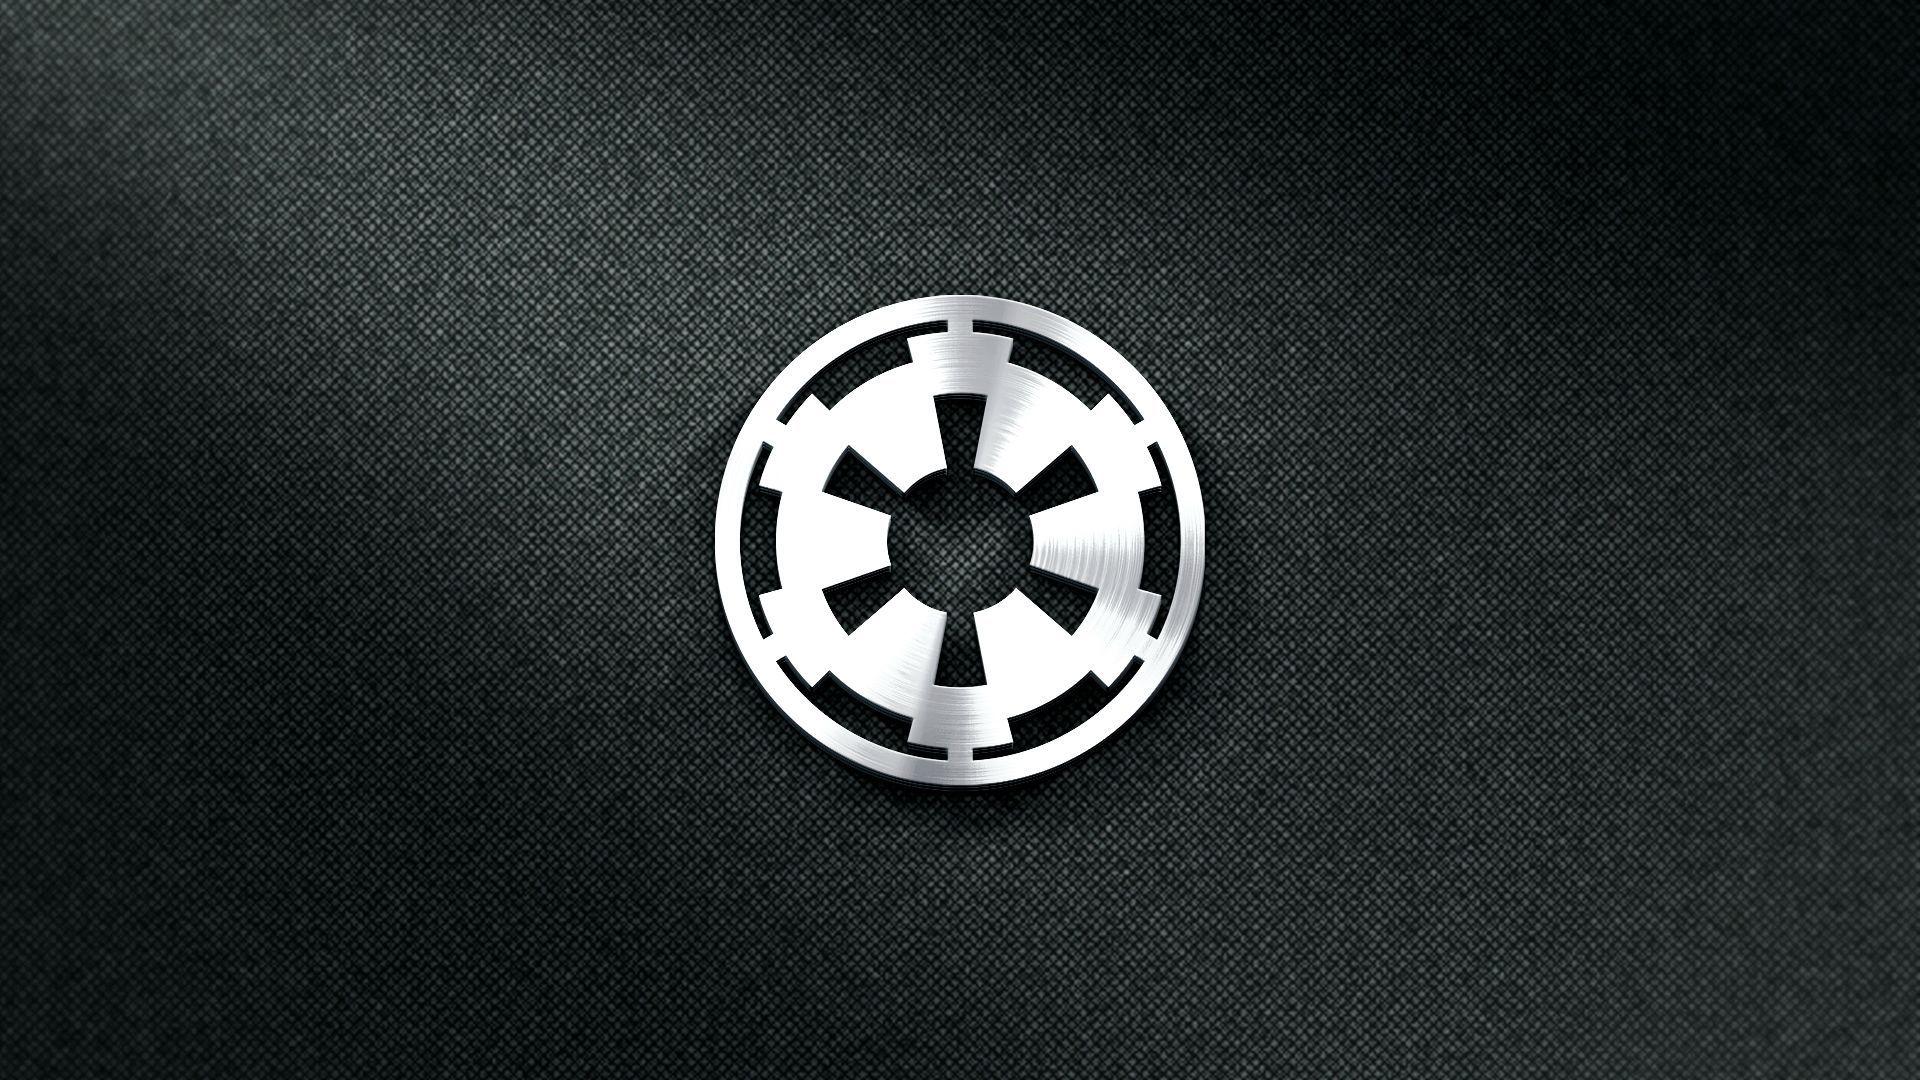 Star Wars Empire Wallpapers.